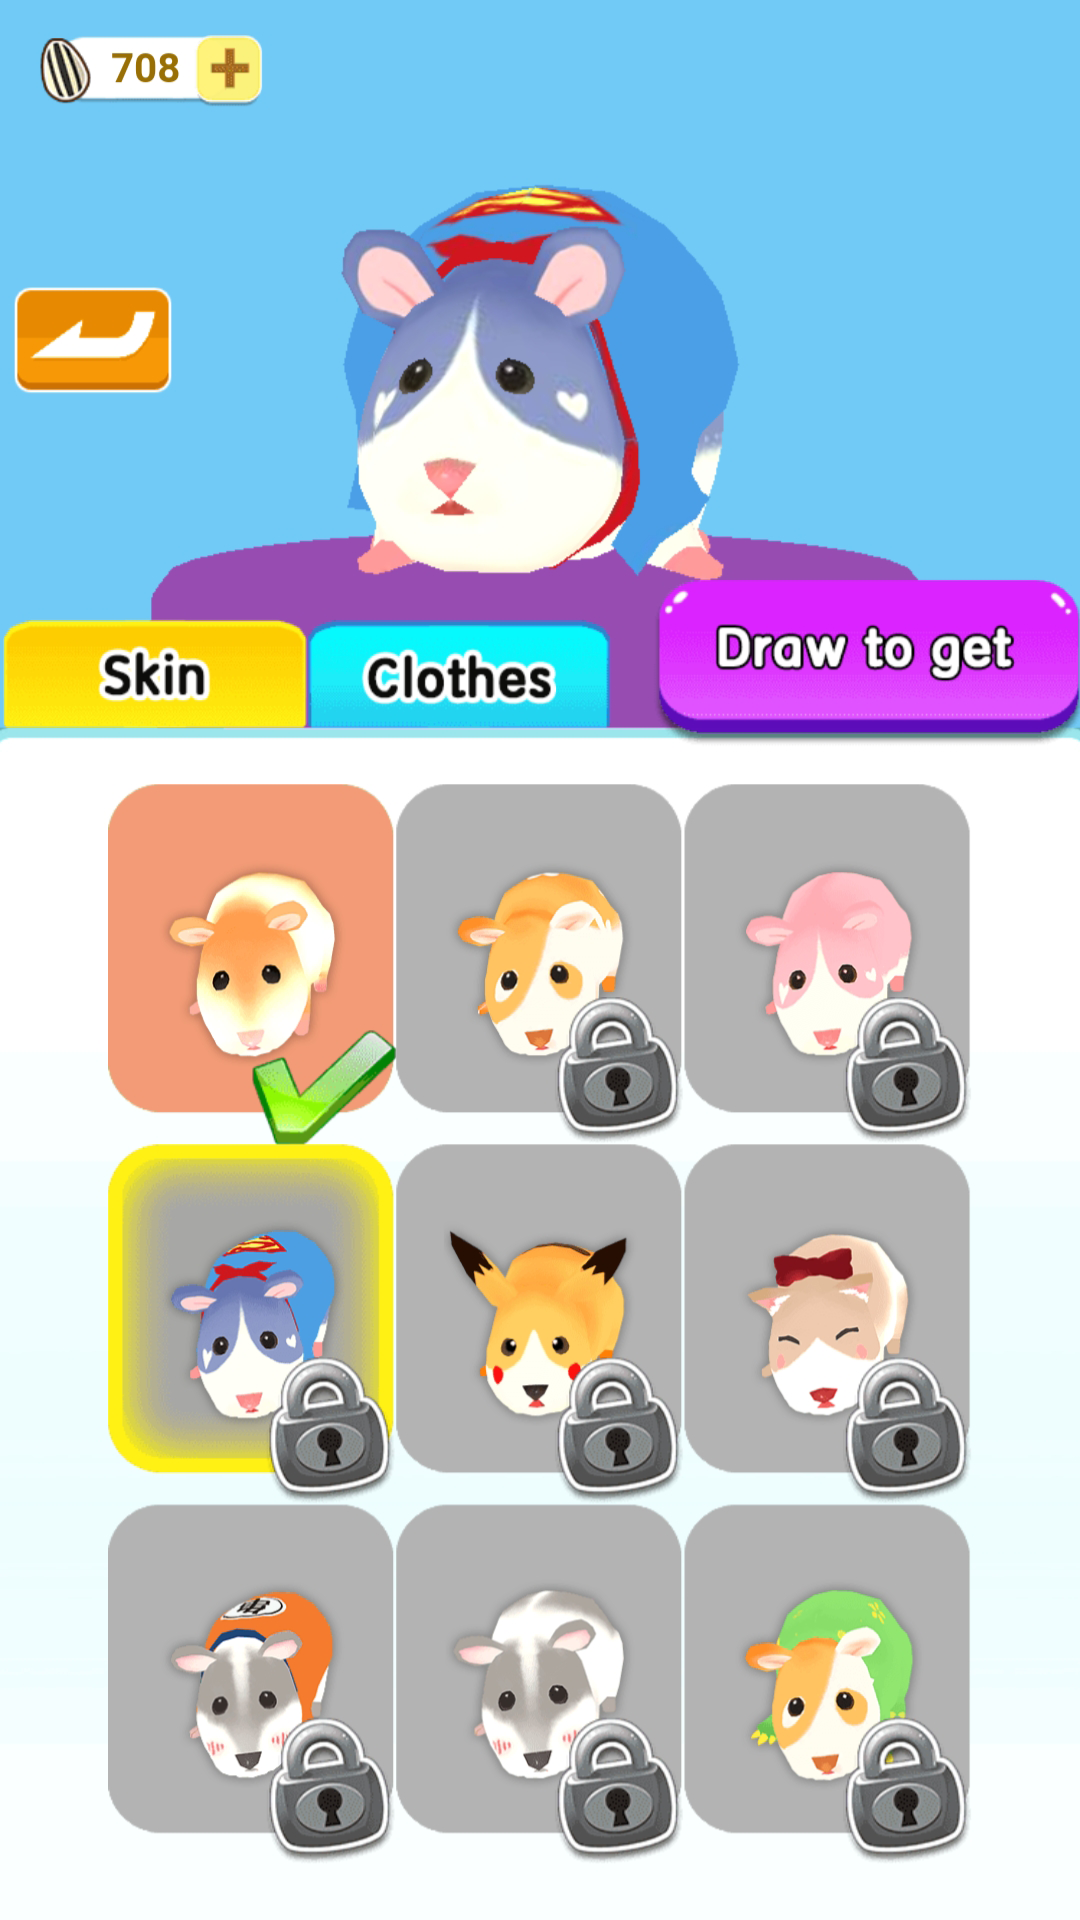 Hamster Maze APK for Android Download